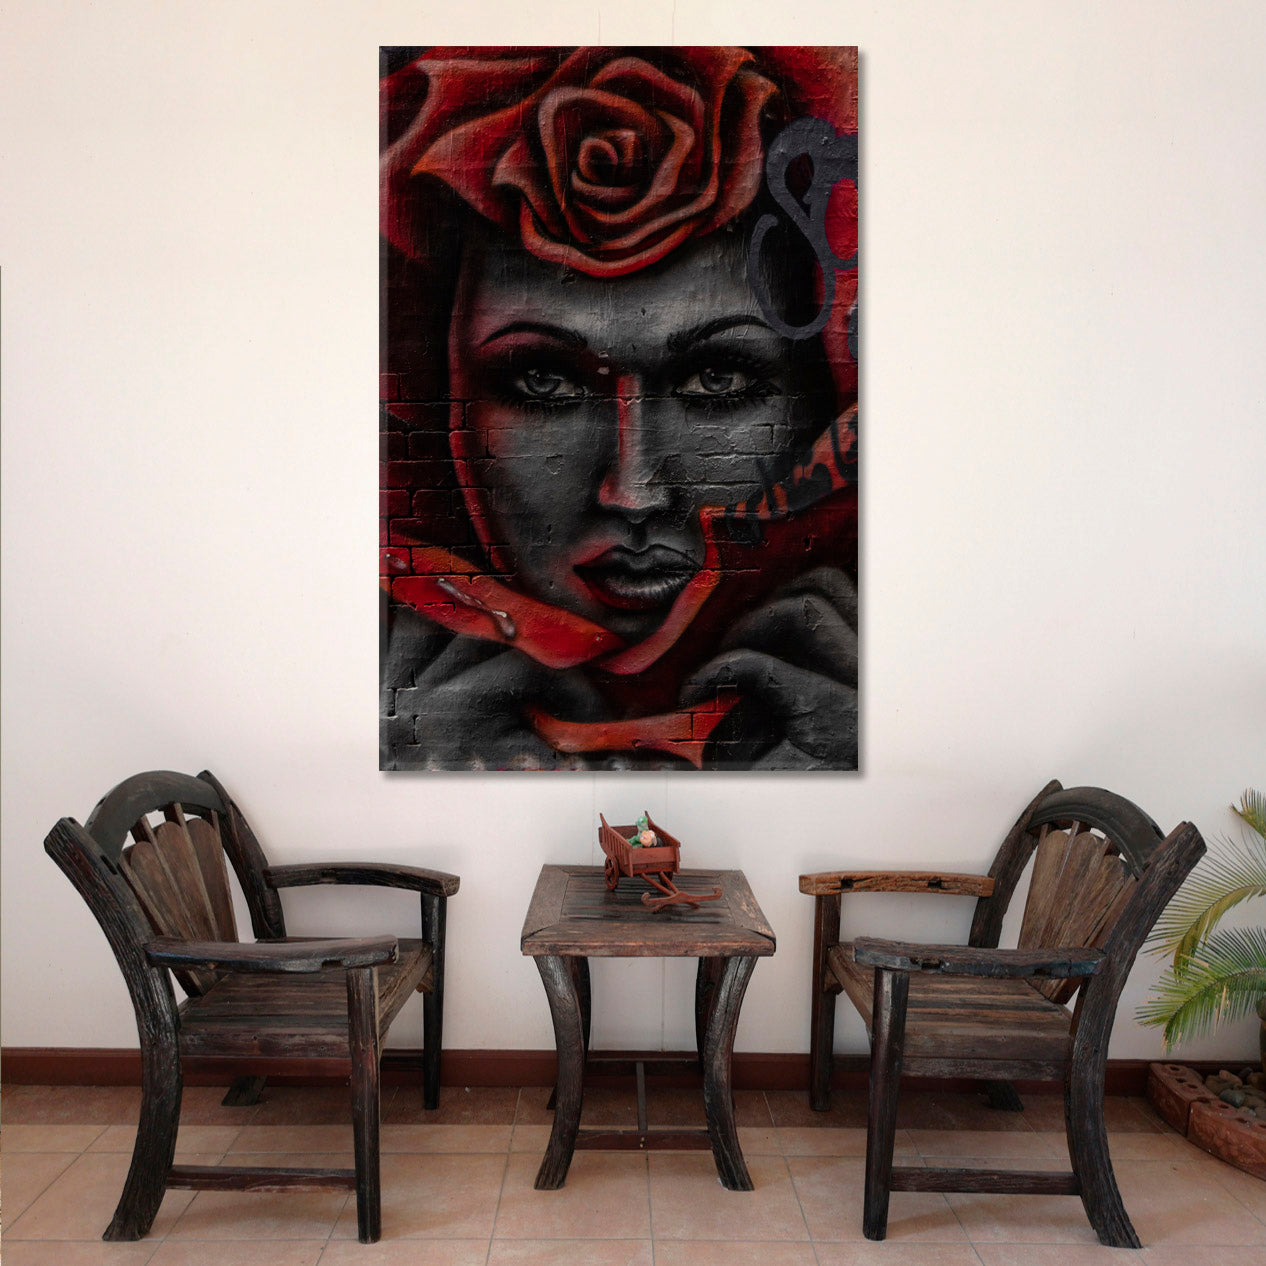 Contemporary Black & Red People Portrait Wall Hangings Artesty   